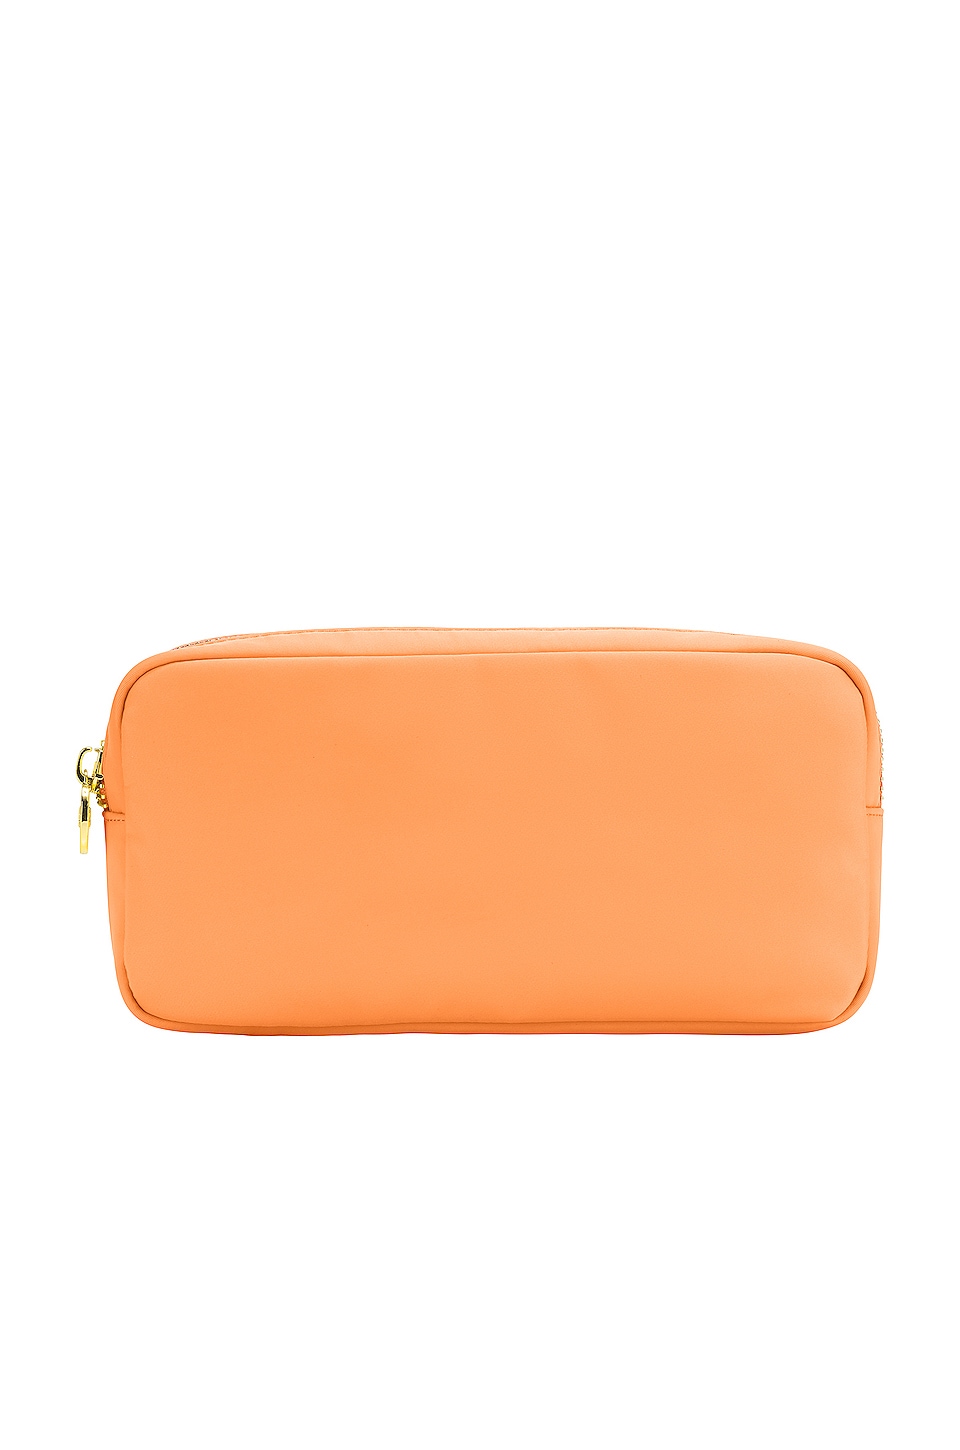 Stoney Clover Lane Classic Small Pouch in Peach